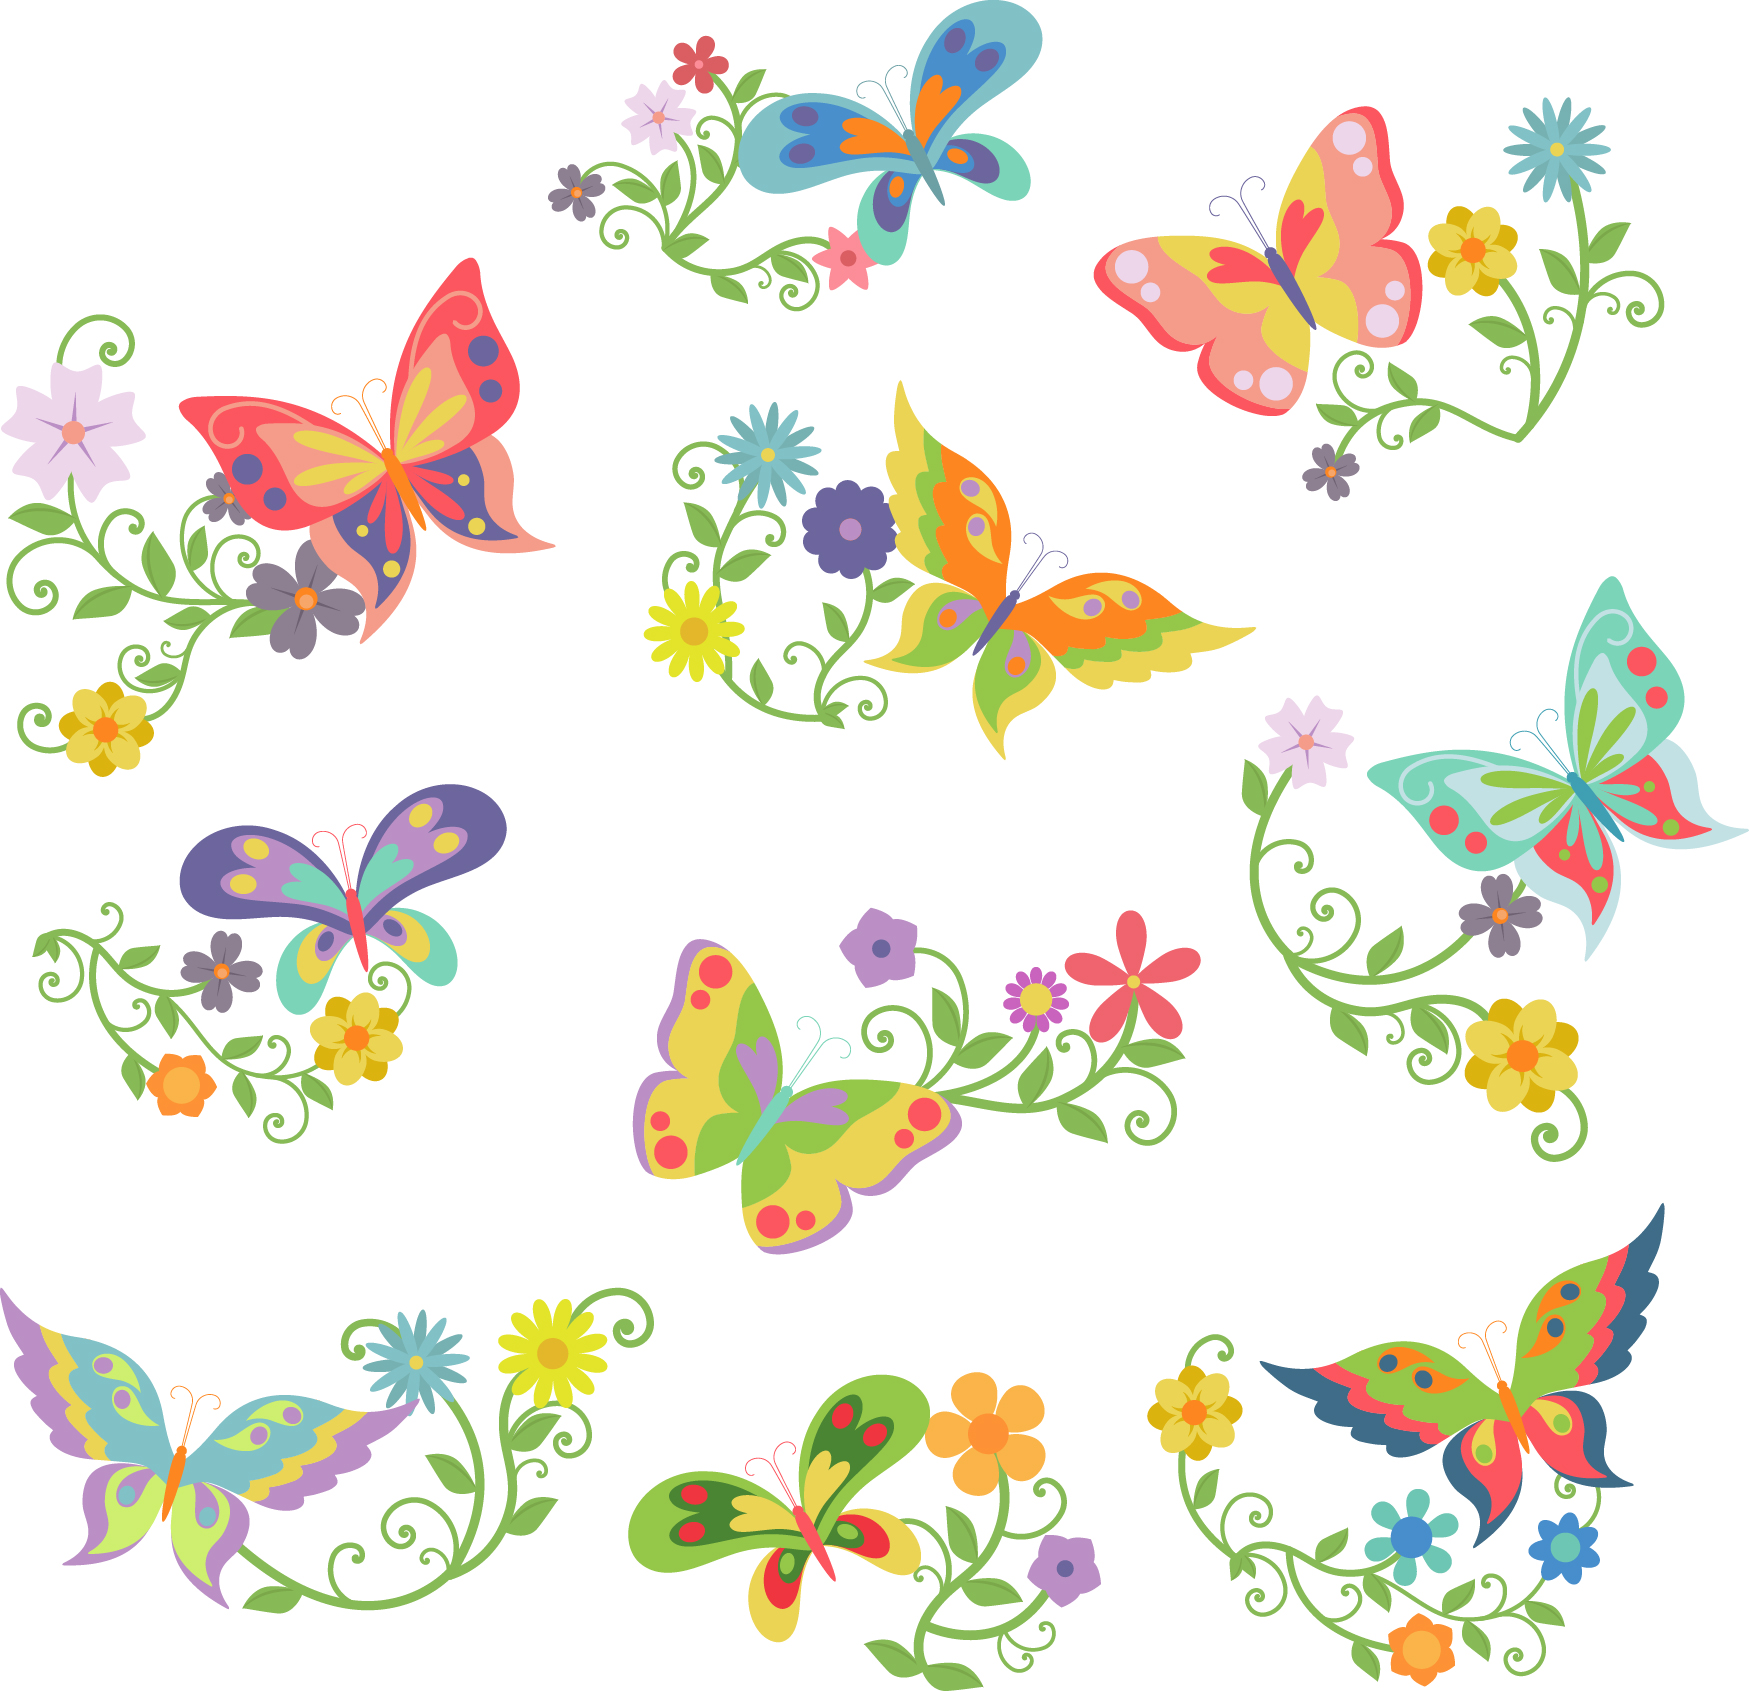 Butterfly flower clipart 5 » Clipart Station.